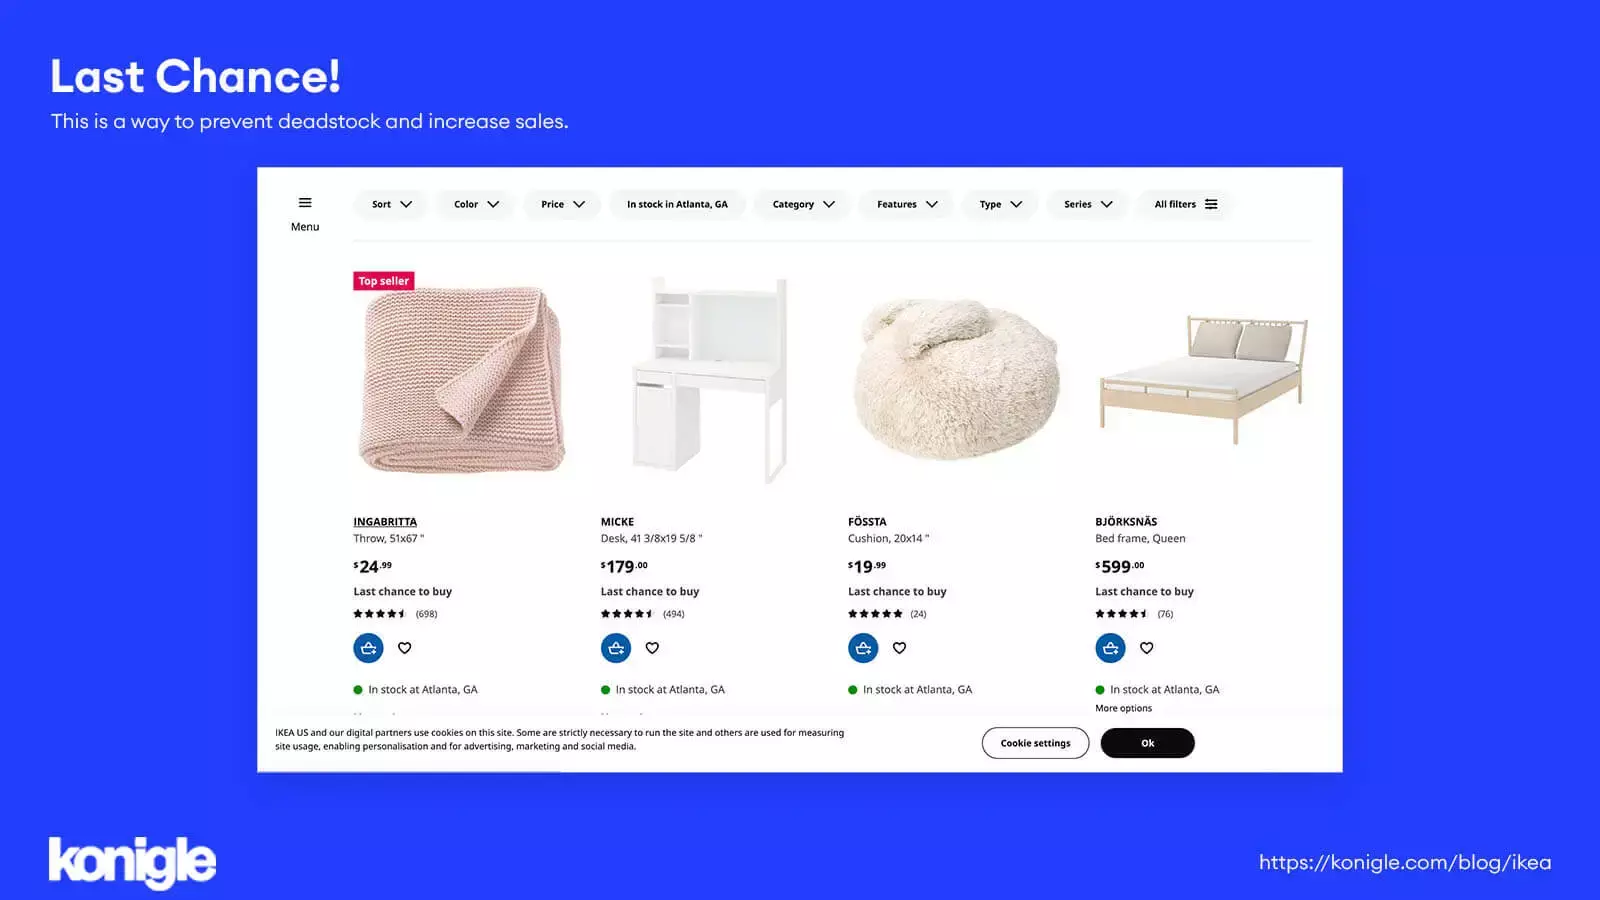 Ikea's website has a clearance section that shows products available for last-chance purchases.